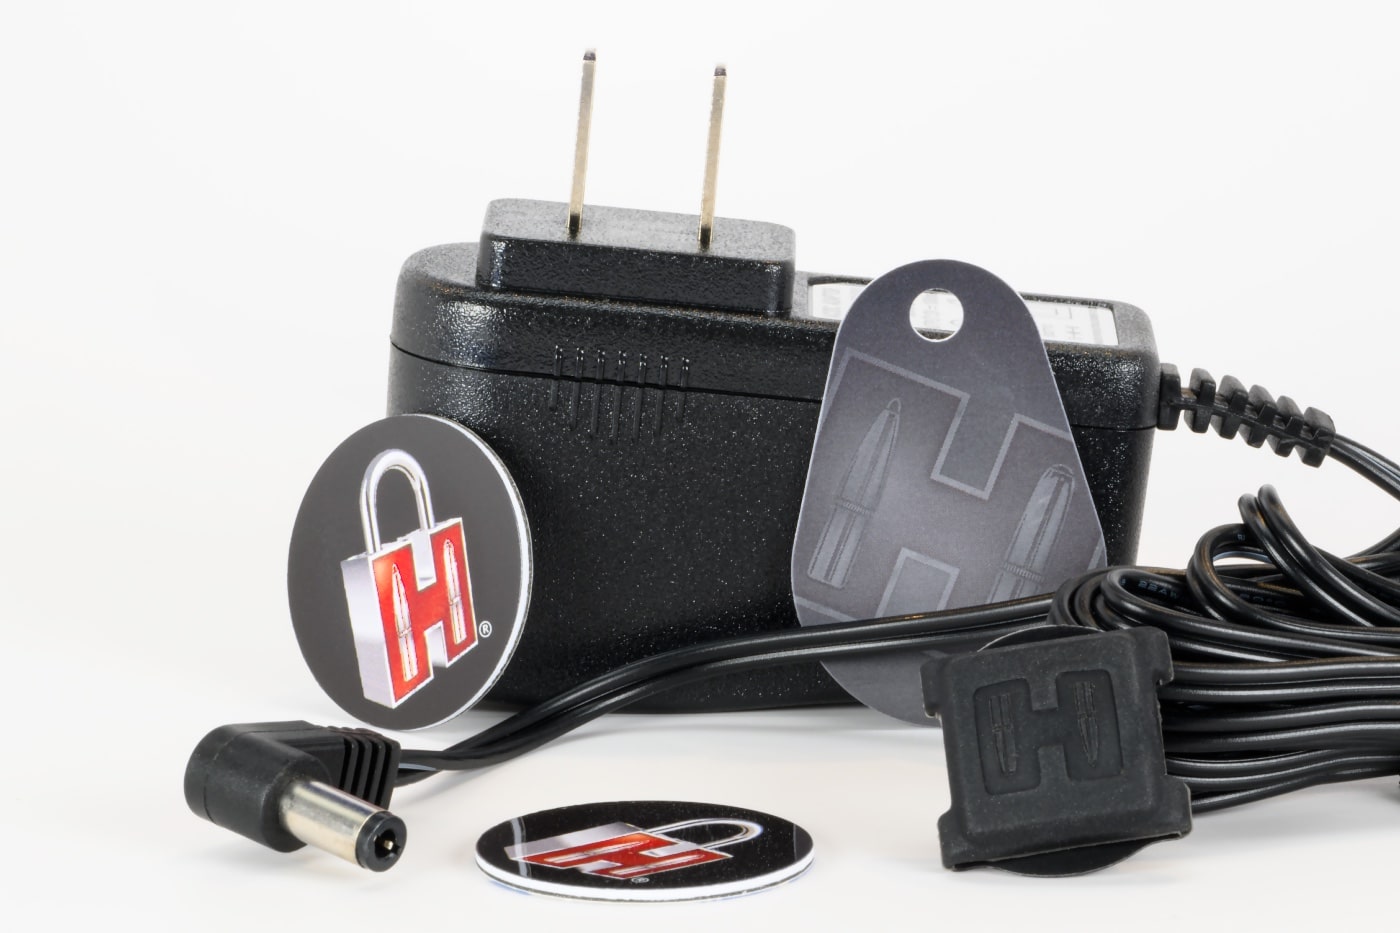 Shown here are a 12v power adaptor, RFID key tags and other accessories for the Hornady RAPiD Safe Ready Vault.